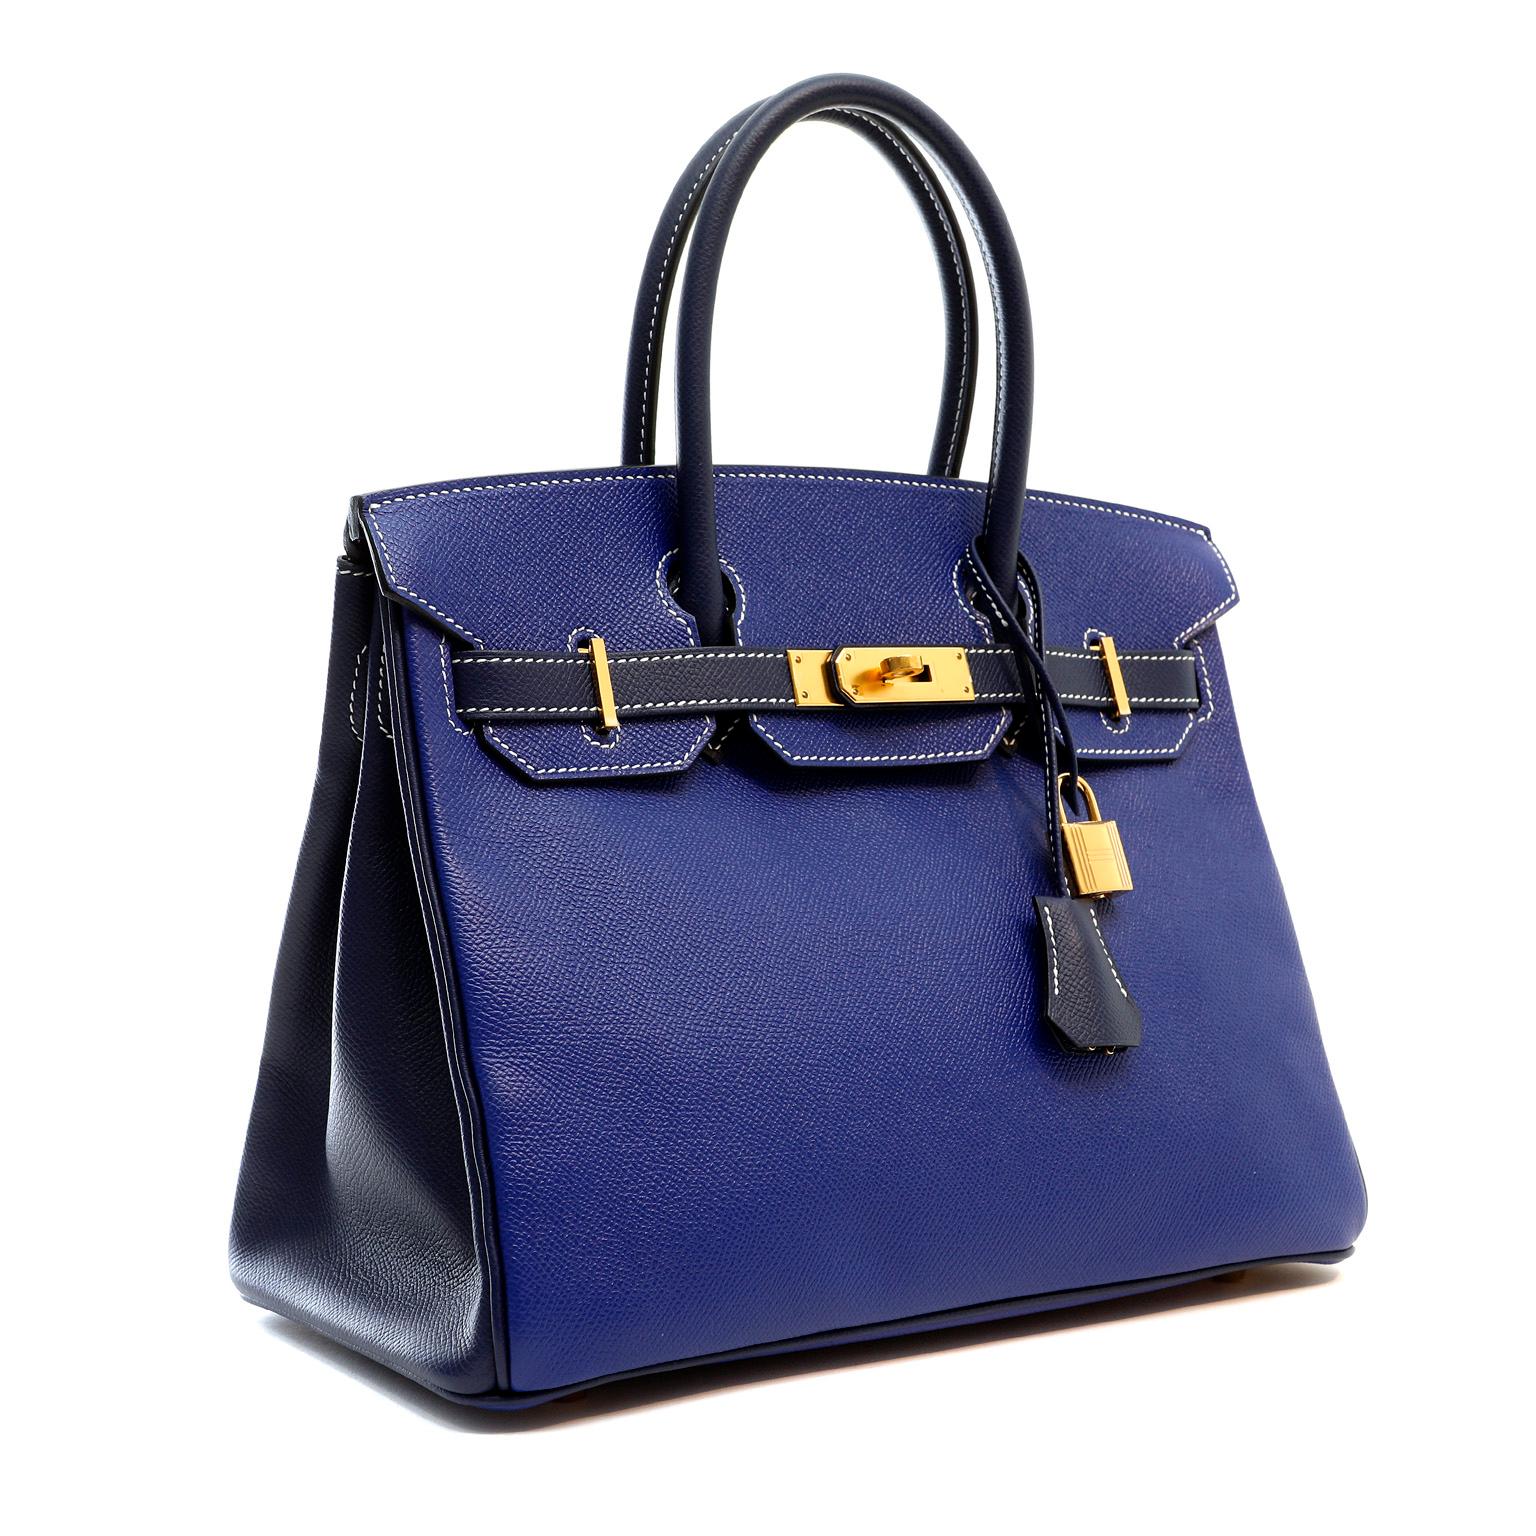 This authentic Hermès Electric Blue and Sapphire Epsom 30 cm Horseshoe Birkin is in pristine unworn condition with the plastic intact on the hardware. Horseshoe Birkins are specially ordered and only offered to select clientele.  This is a rare and